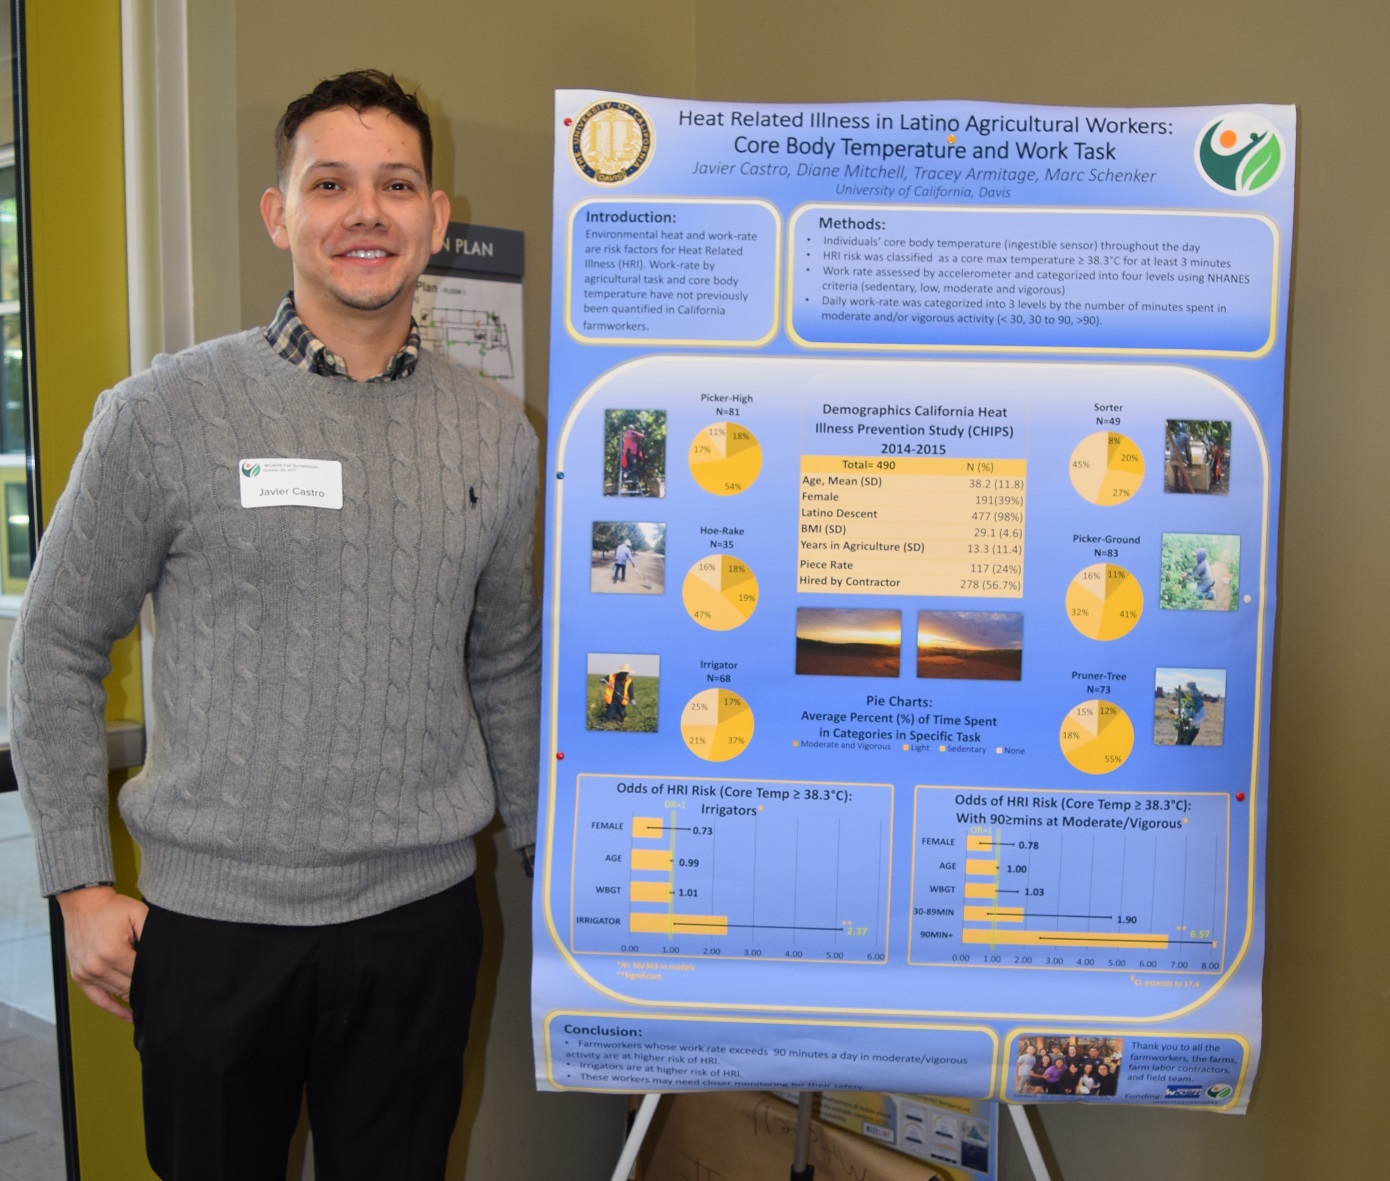 Javier Castro stands next to his heat illness research poster